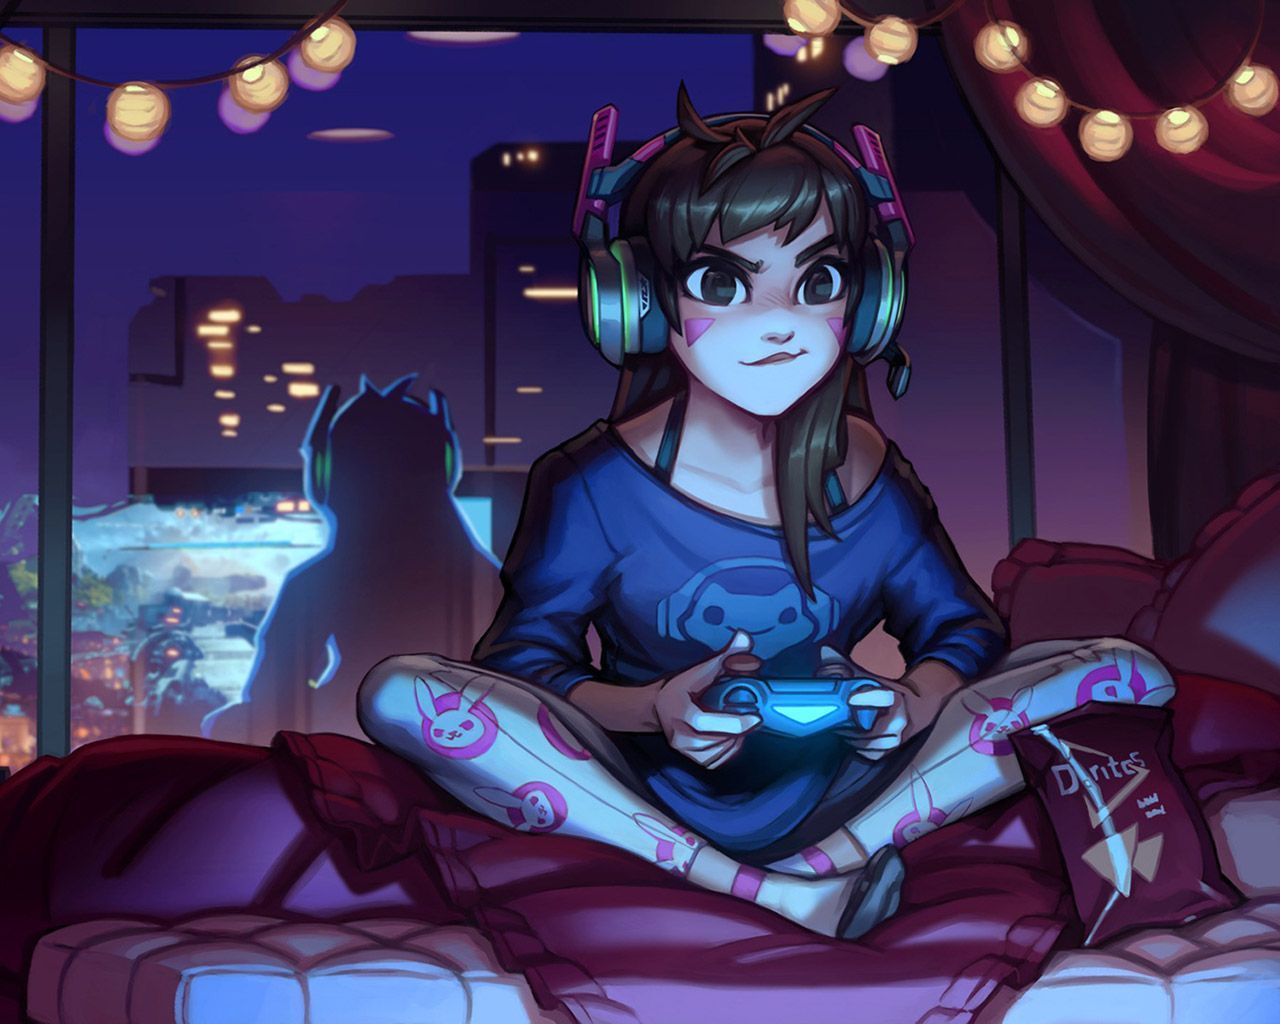 The perfect wallpaper for night gaming! #Music #IndieArtist #Chicago. Overwatch fan art, Overwatch, Overwatch comic